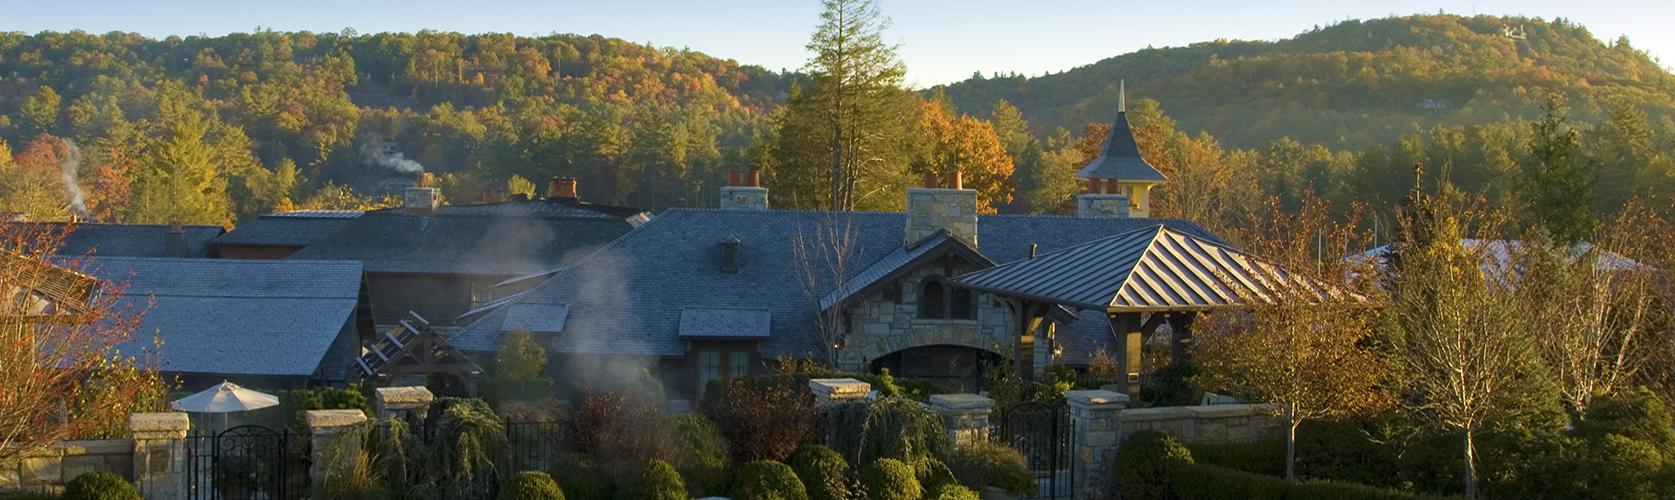 Stay & Dine in Highlands, NC - journeyPod - Luxury Vacation Travel Guide